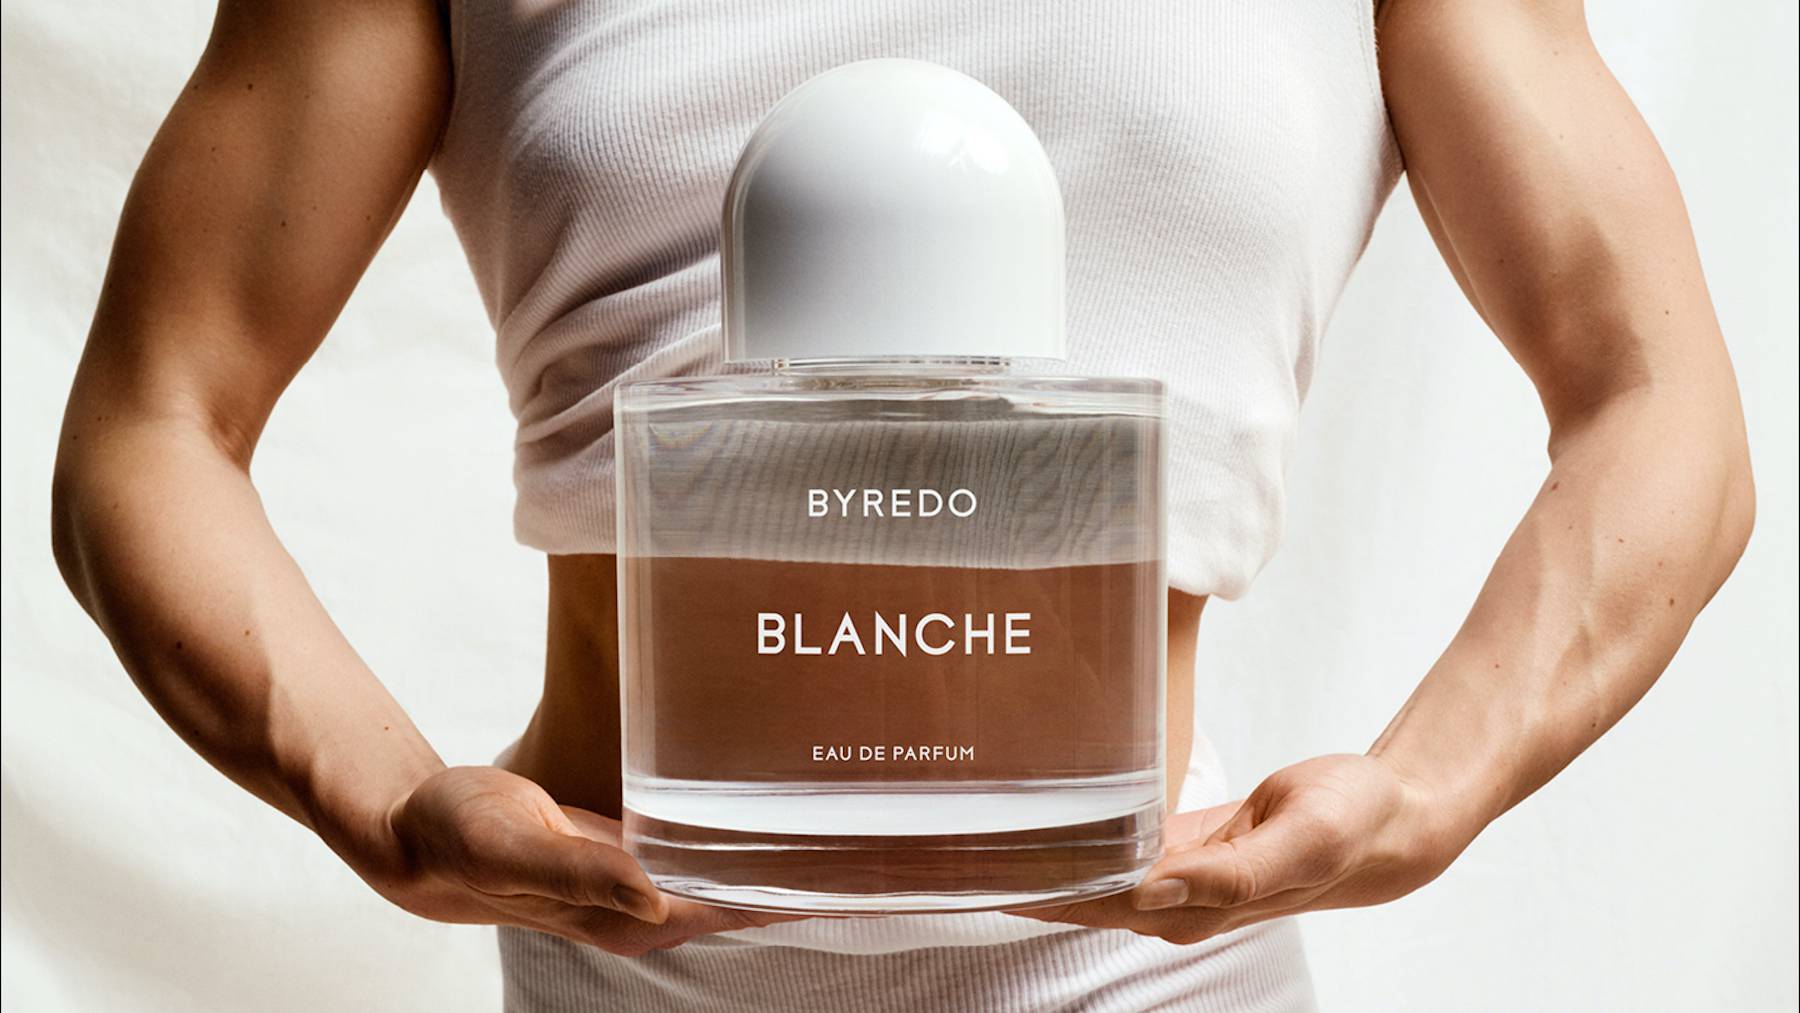 Byredo entered a new phase of growth over the pandemic, almost doubling sales to reach €119 million.